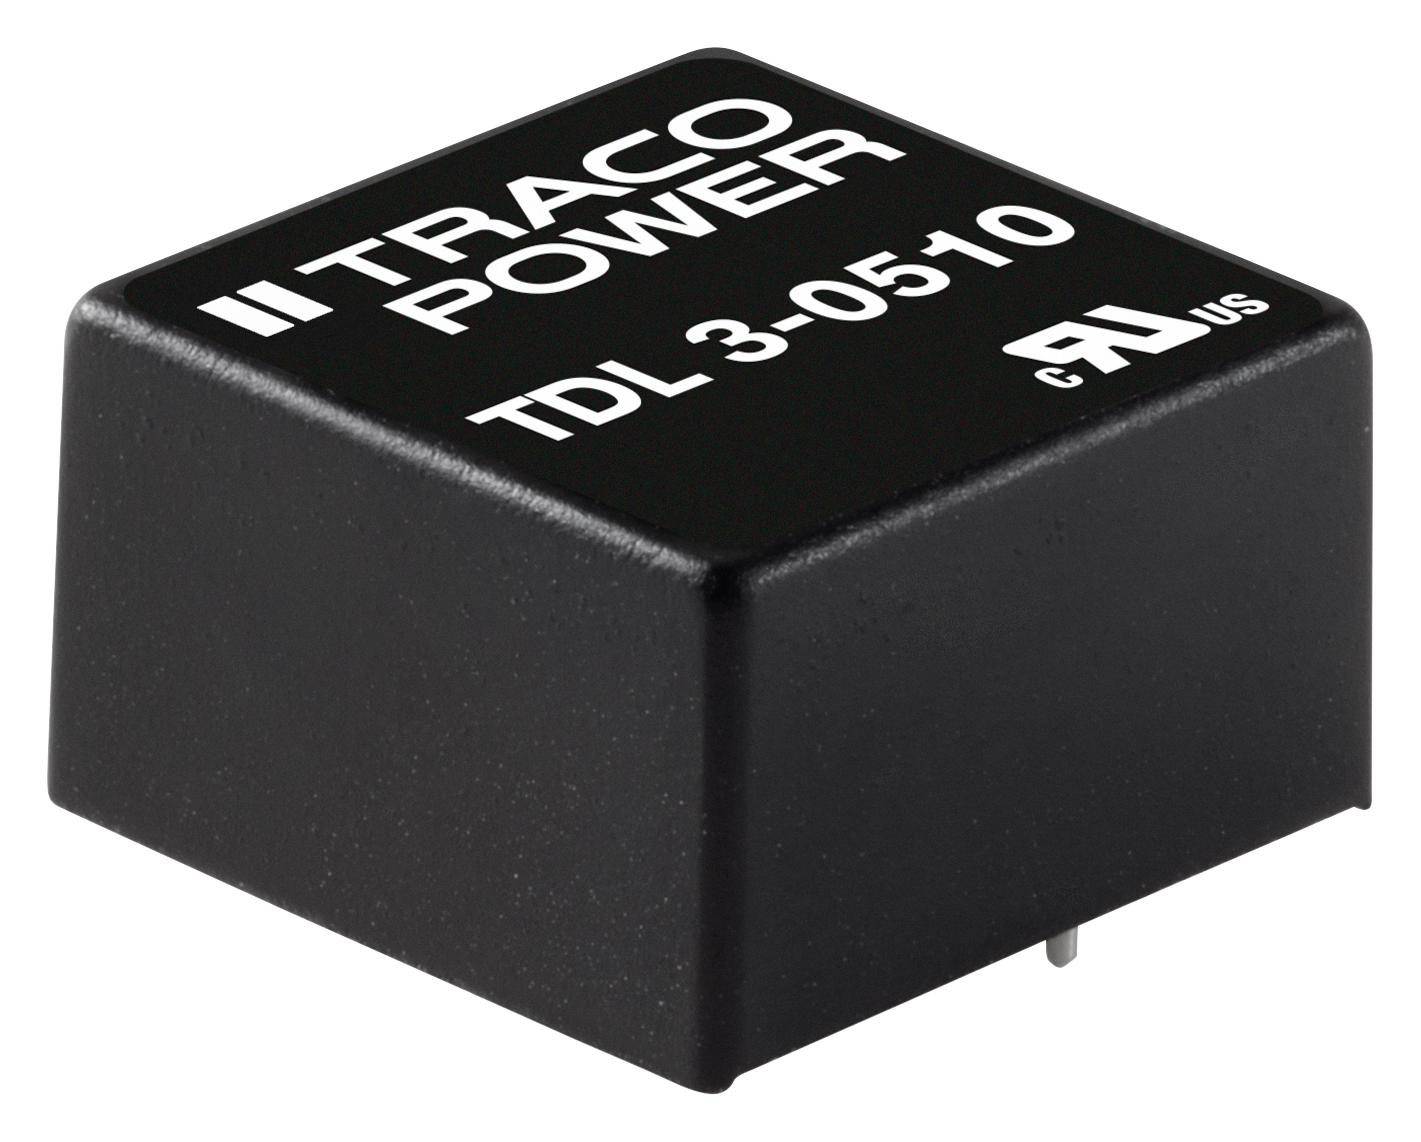 TDL 3-0522 DC-DC CONVERTER, 2 O/P, 3W TRACO POWER